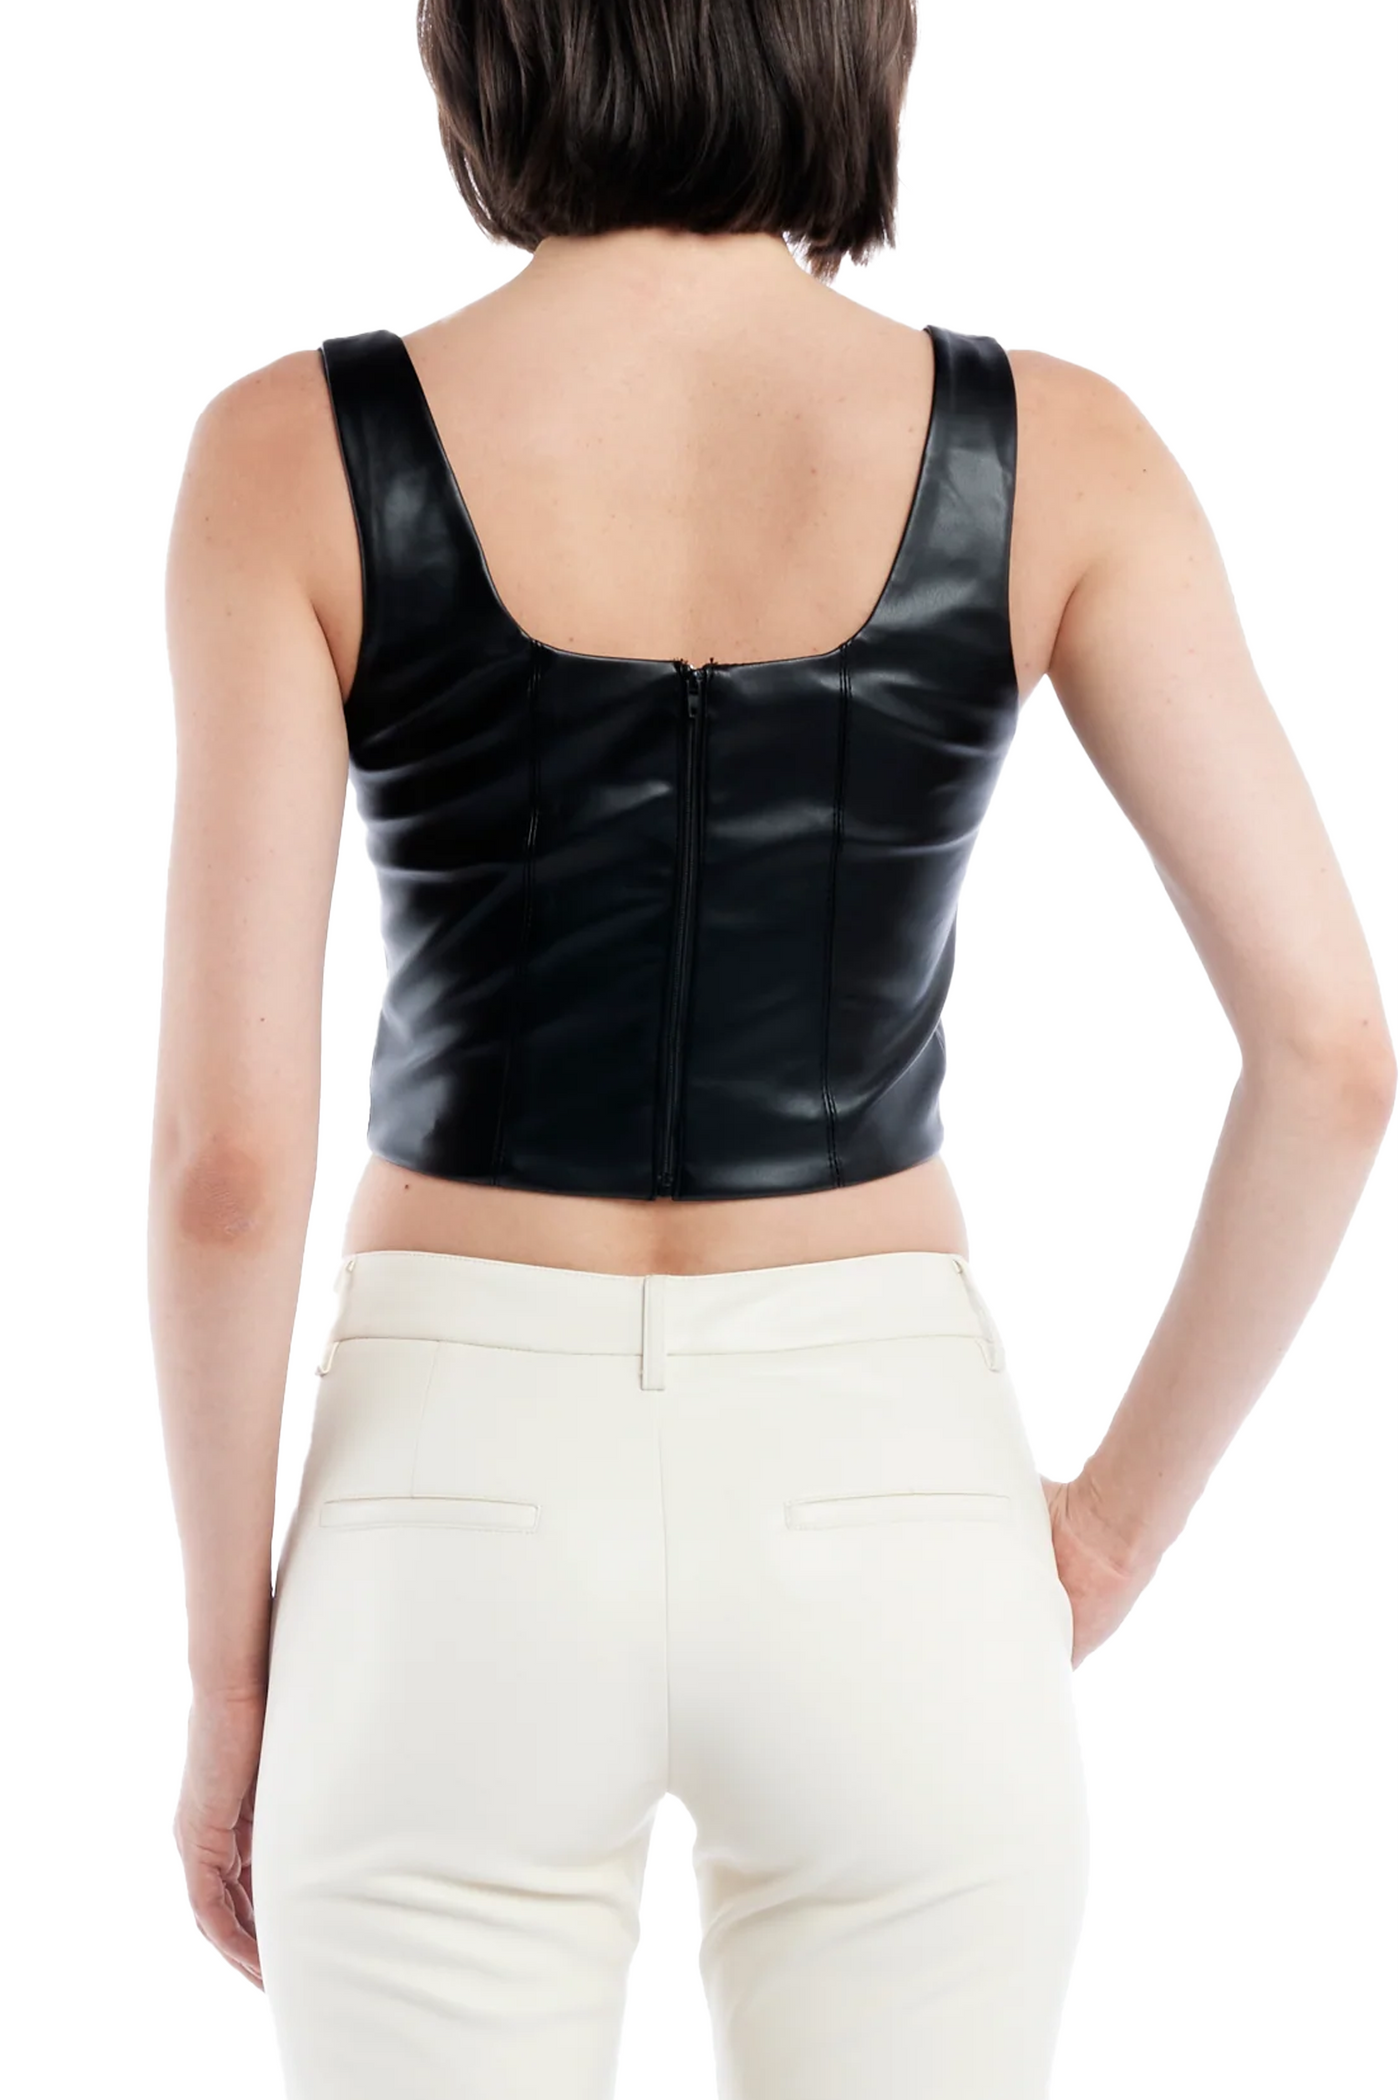 LBLC the Label: Benny Bustier Top in Black